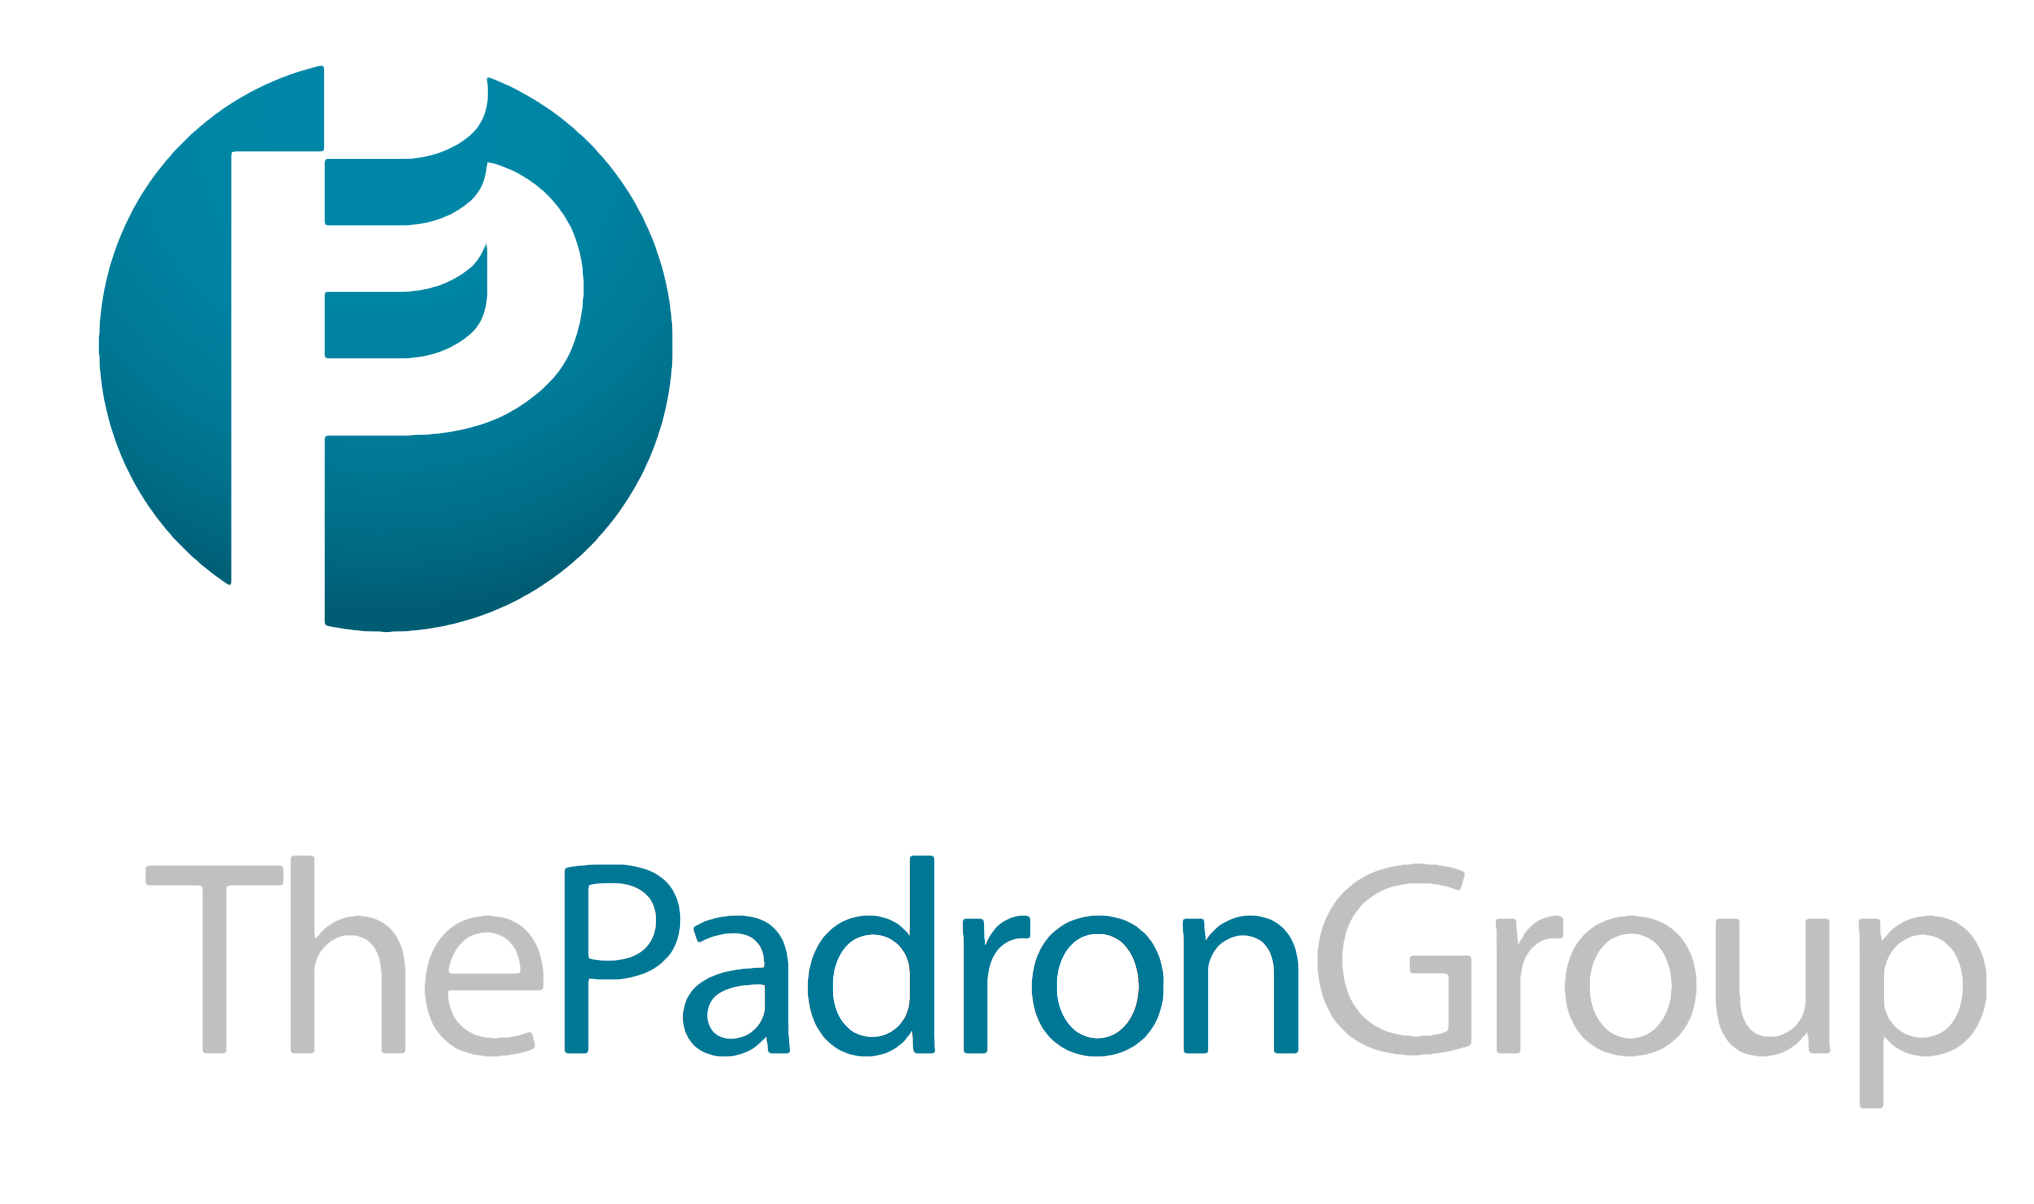 The Padron Group